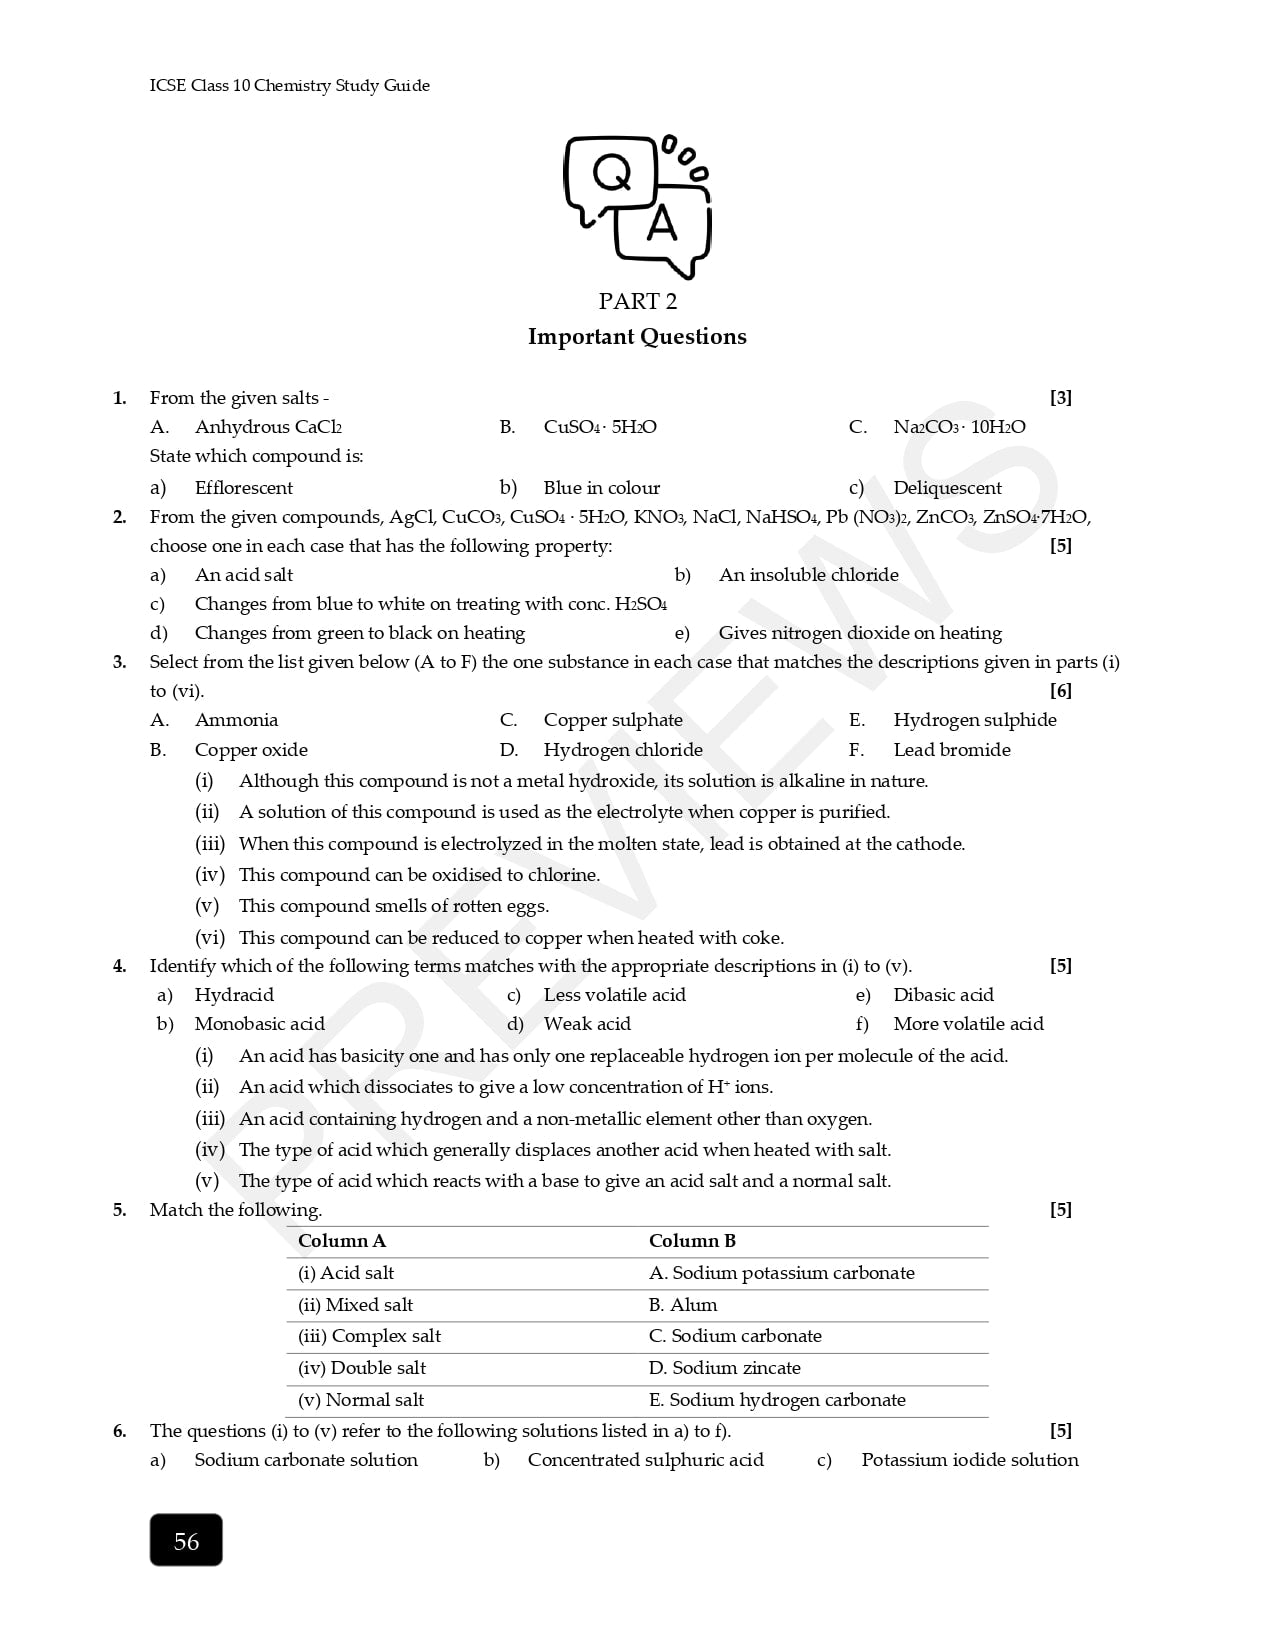 new chemistry study guide class 10 